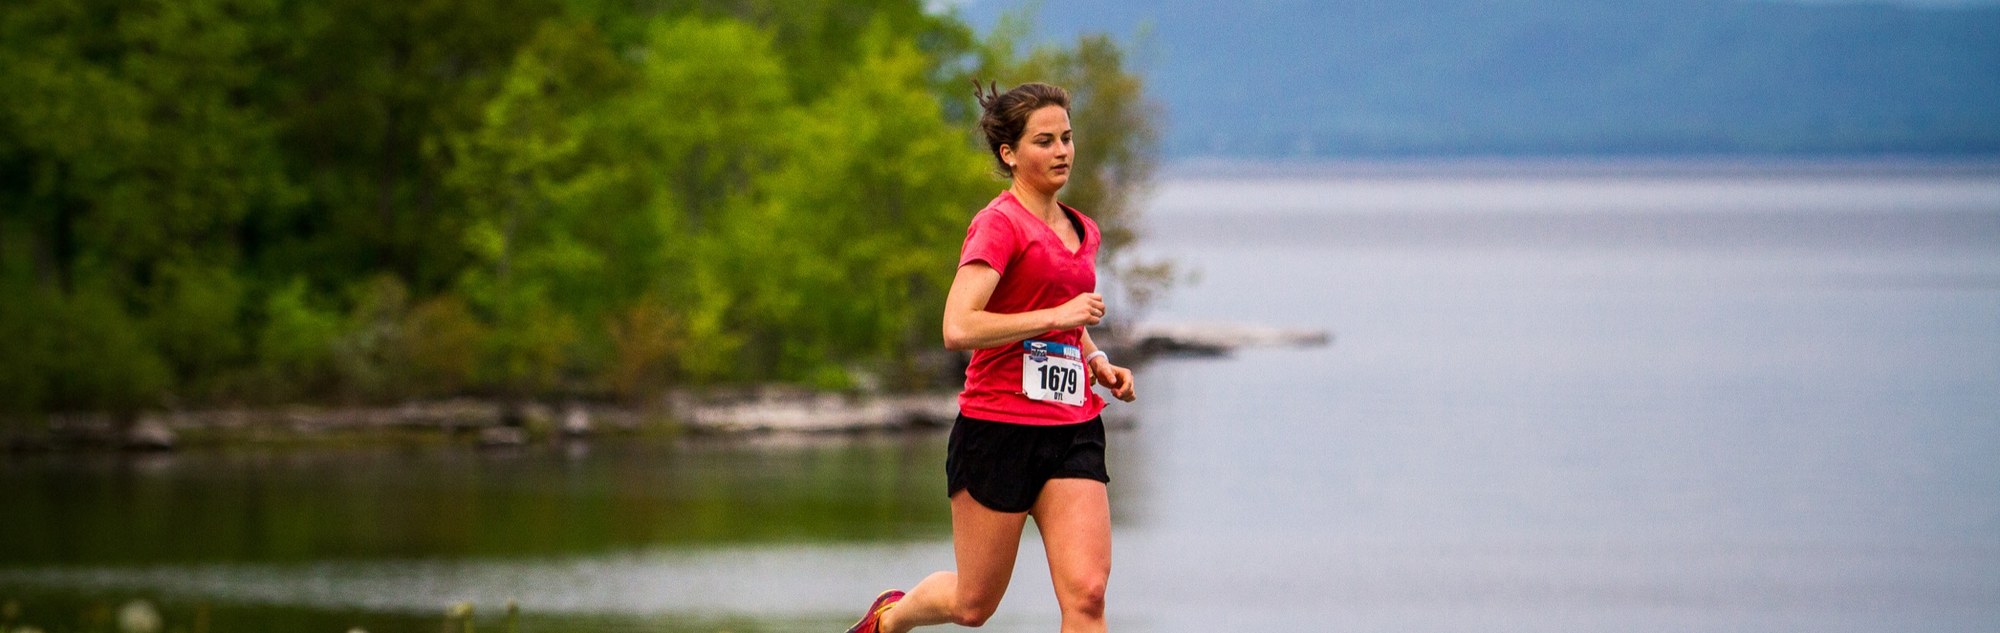 woman running in front of lake